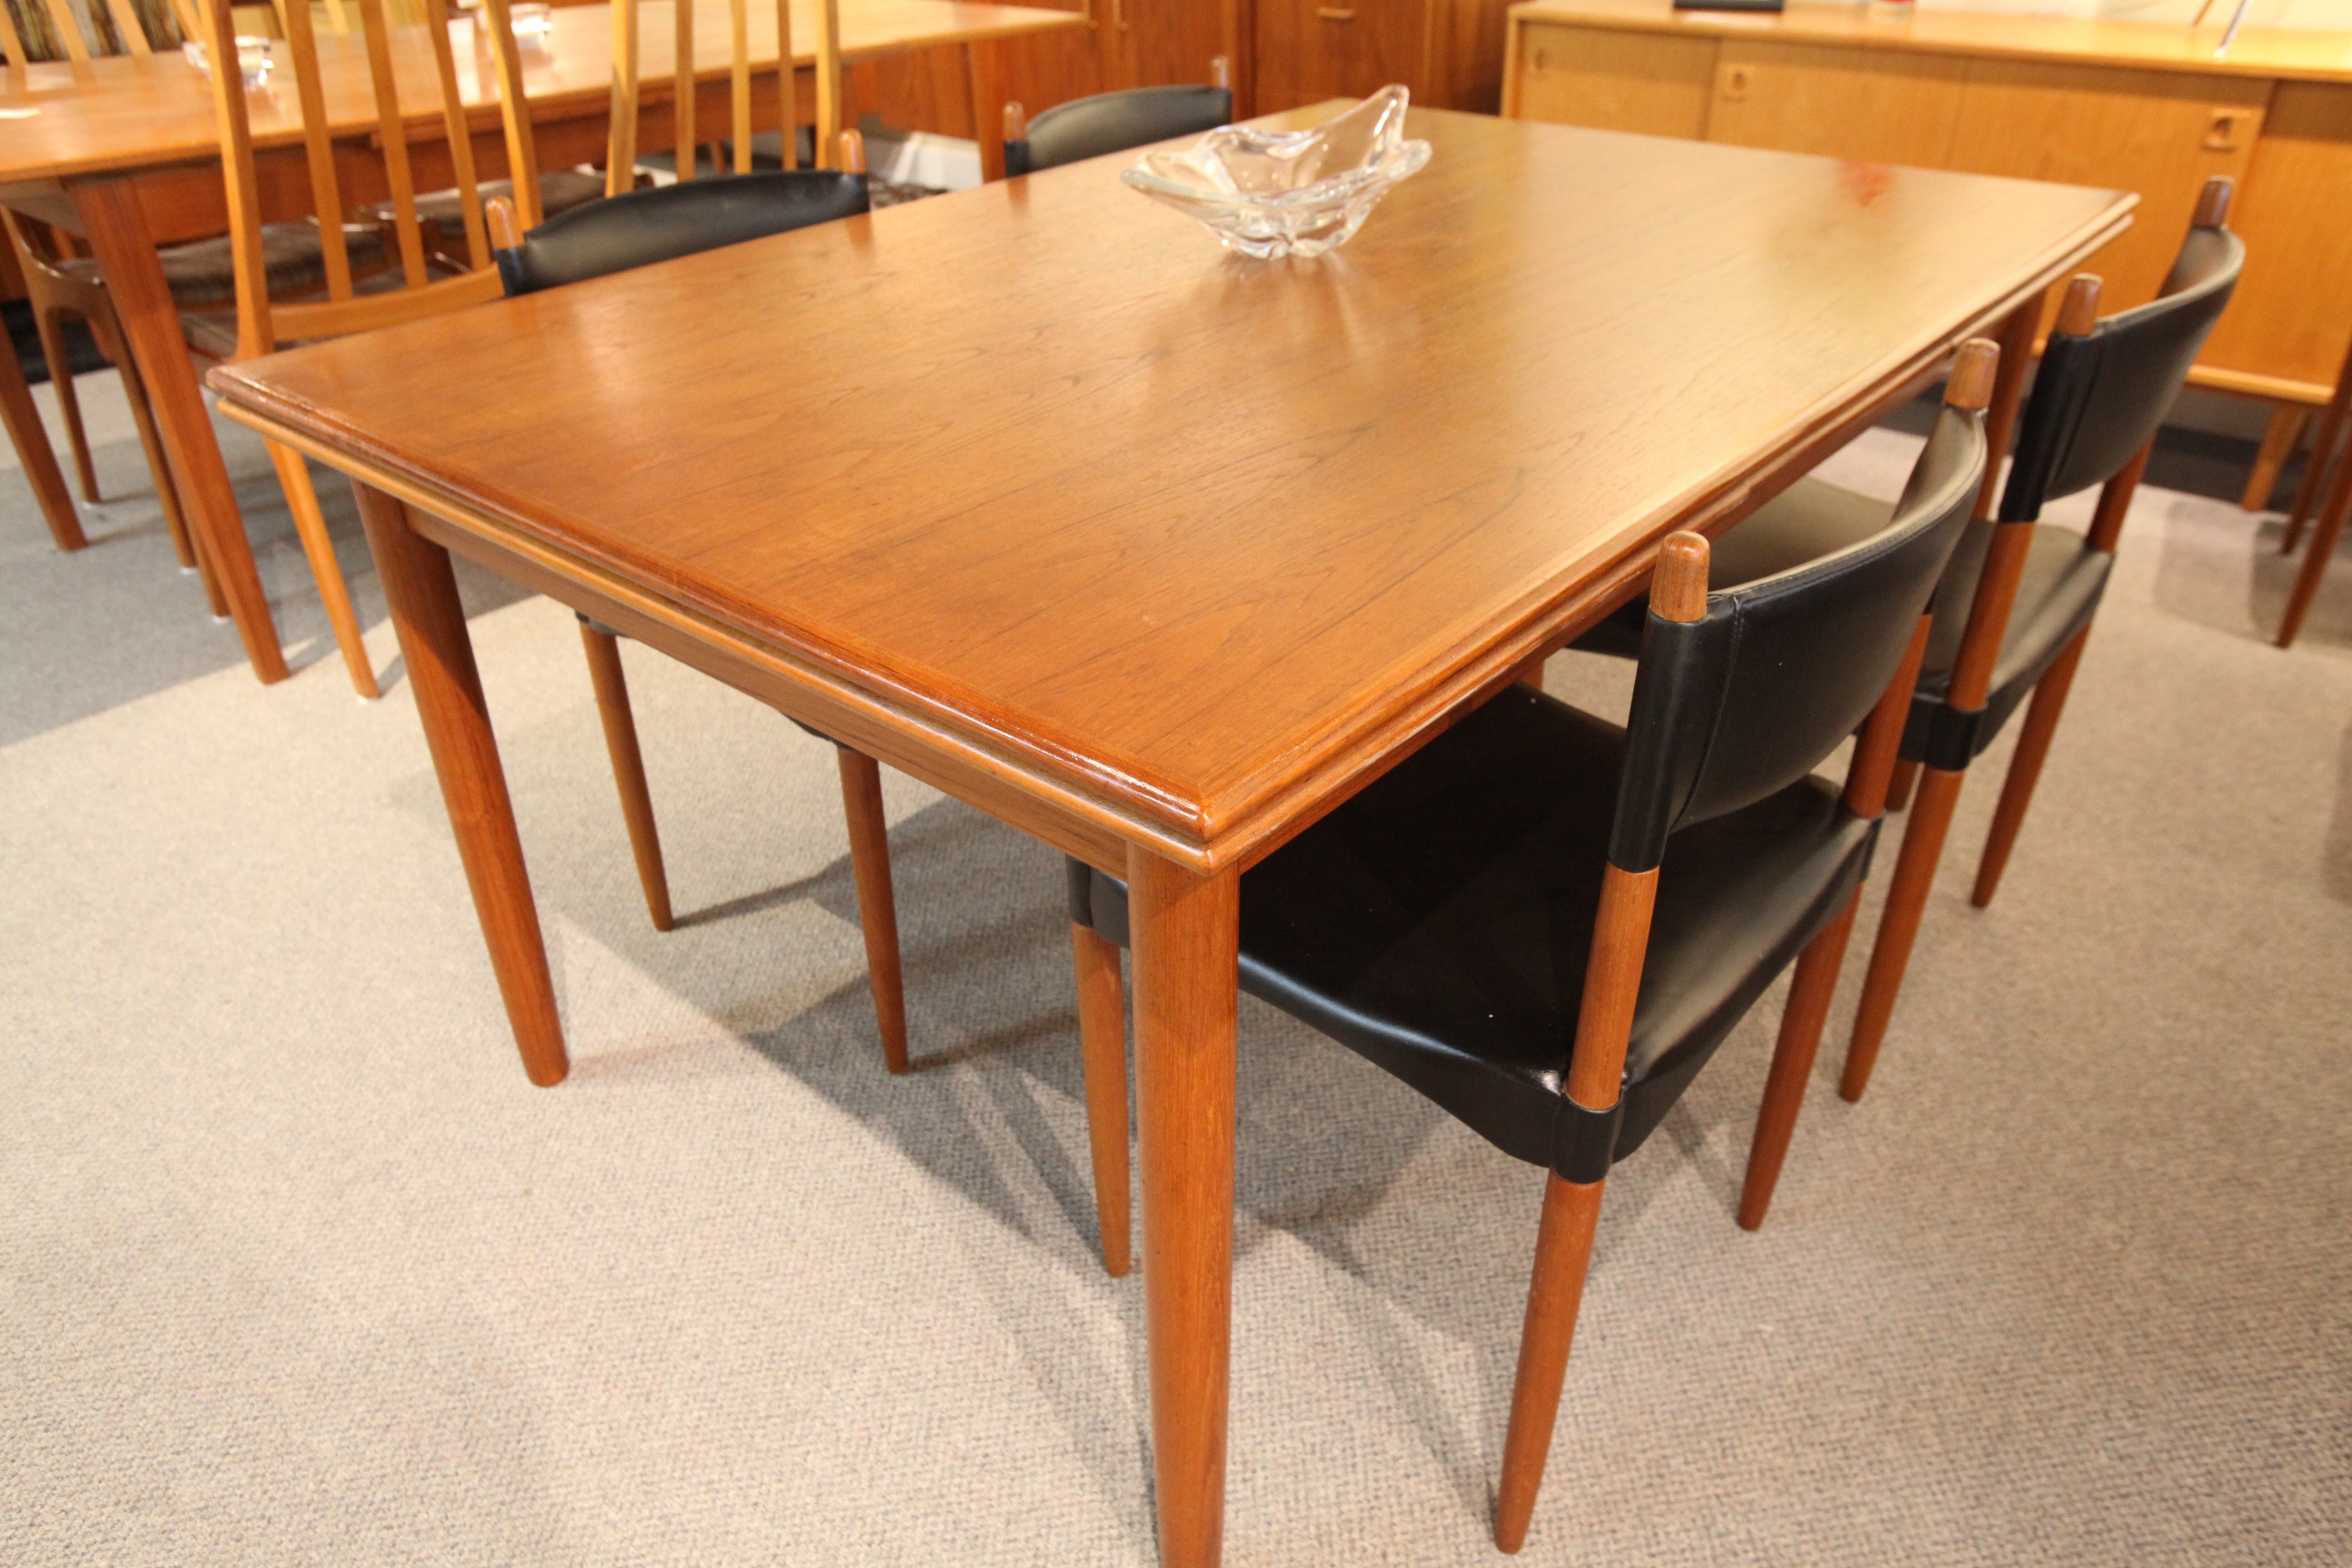 Danish Teak Dining Table with Pullout Extensions (102" x 39") or (59" x 39')